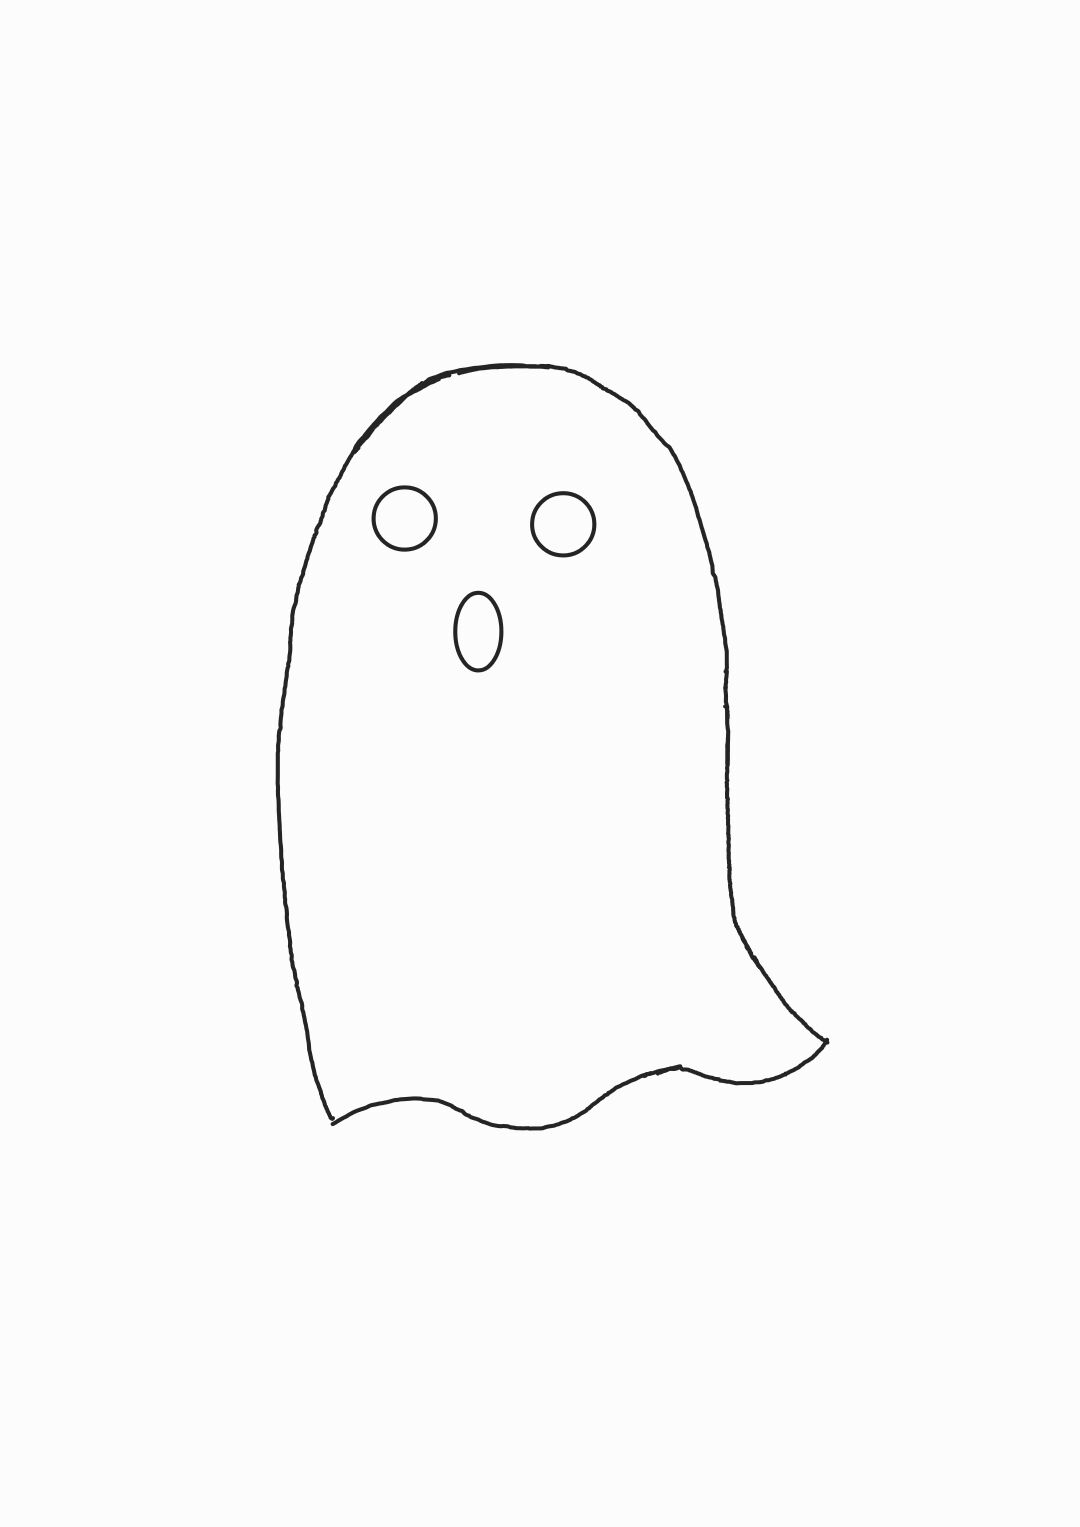 Ghost - "BOO" Halloween trick or treat gift